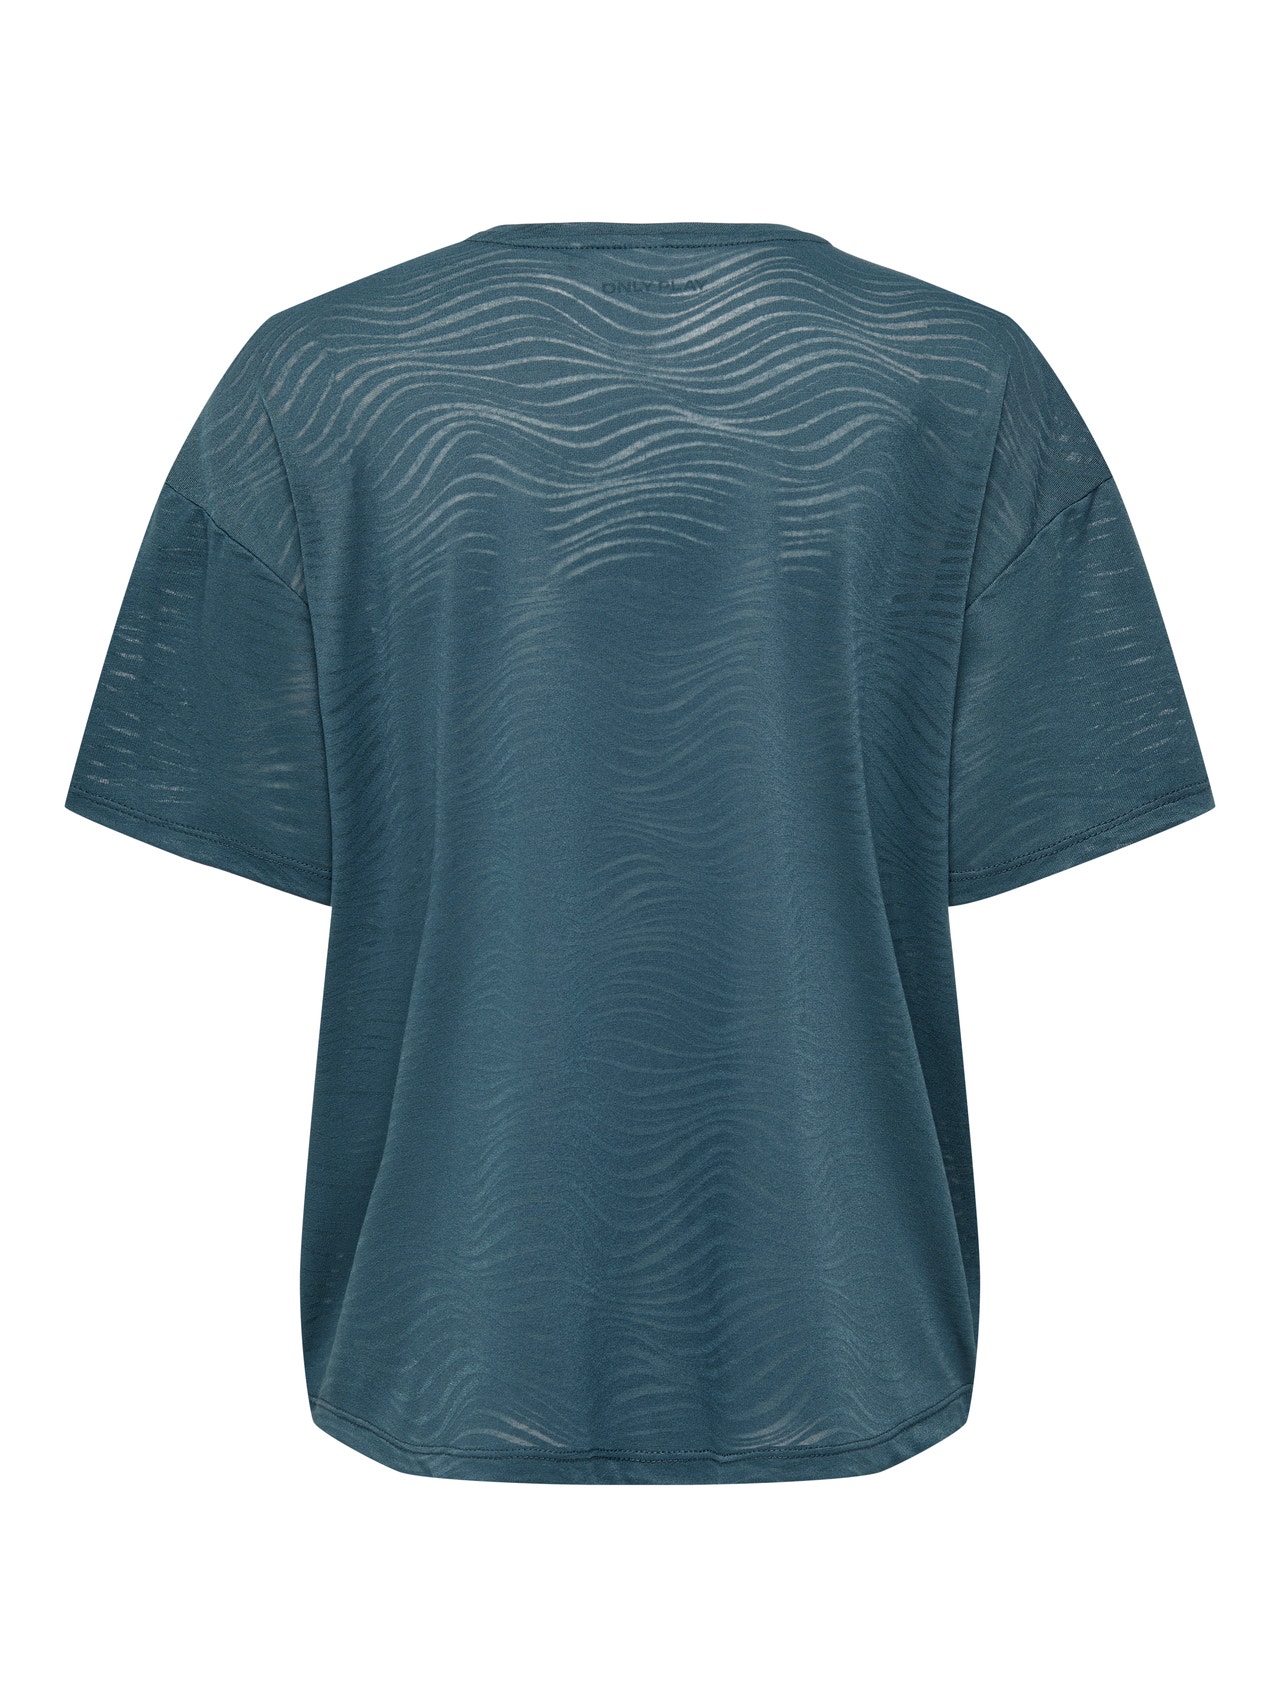 ONLY Loose fit training top -Orion Blue - 15295655